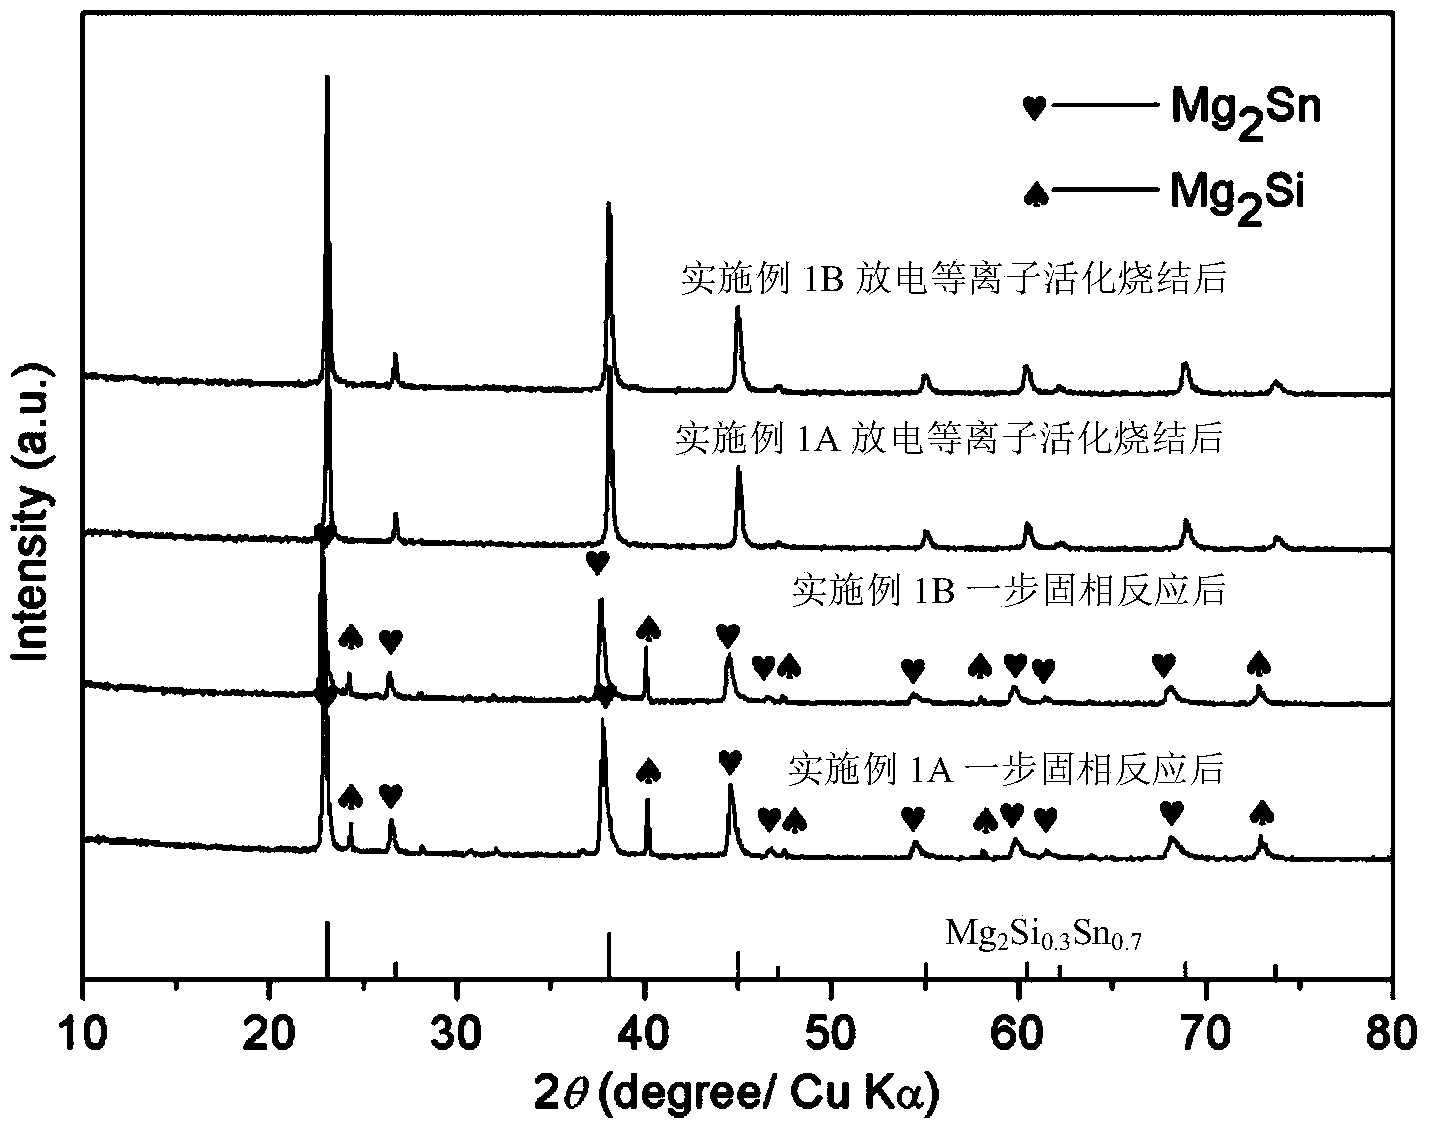 Method of quickly preparing Mg-Si-Sn-based thermoelectric material in controllable manner